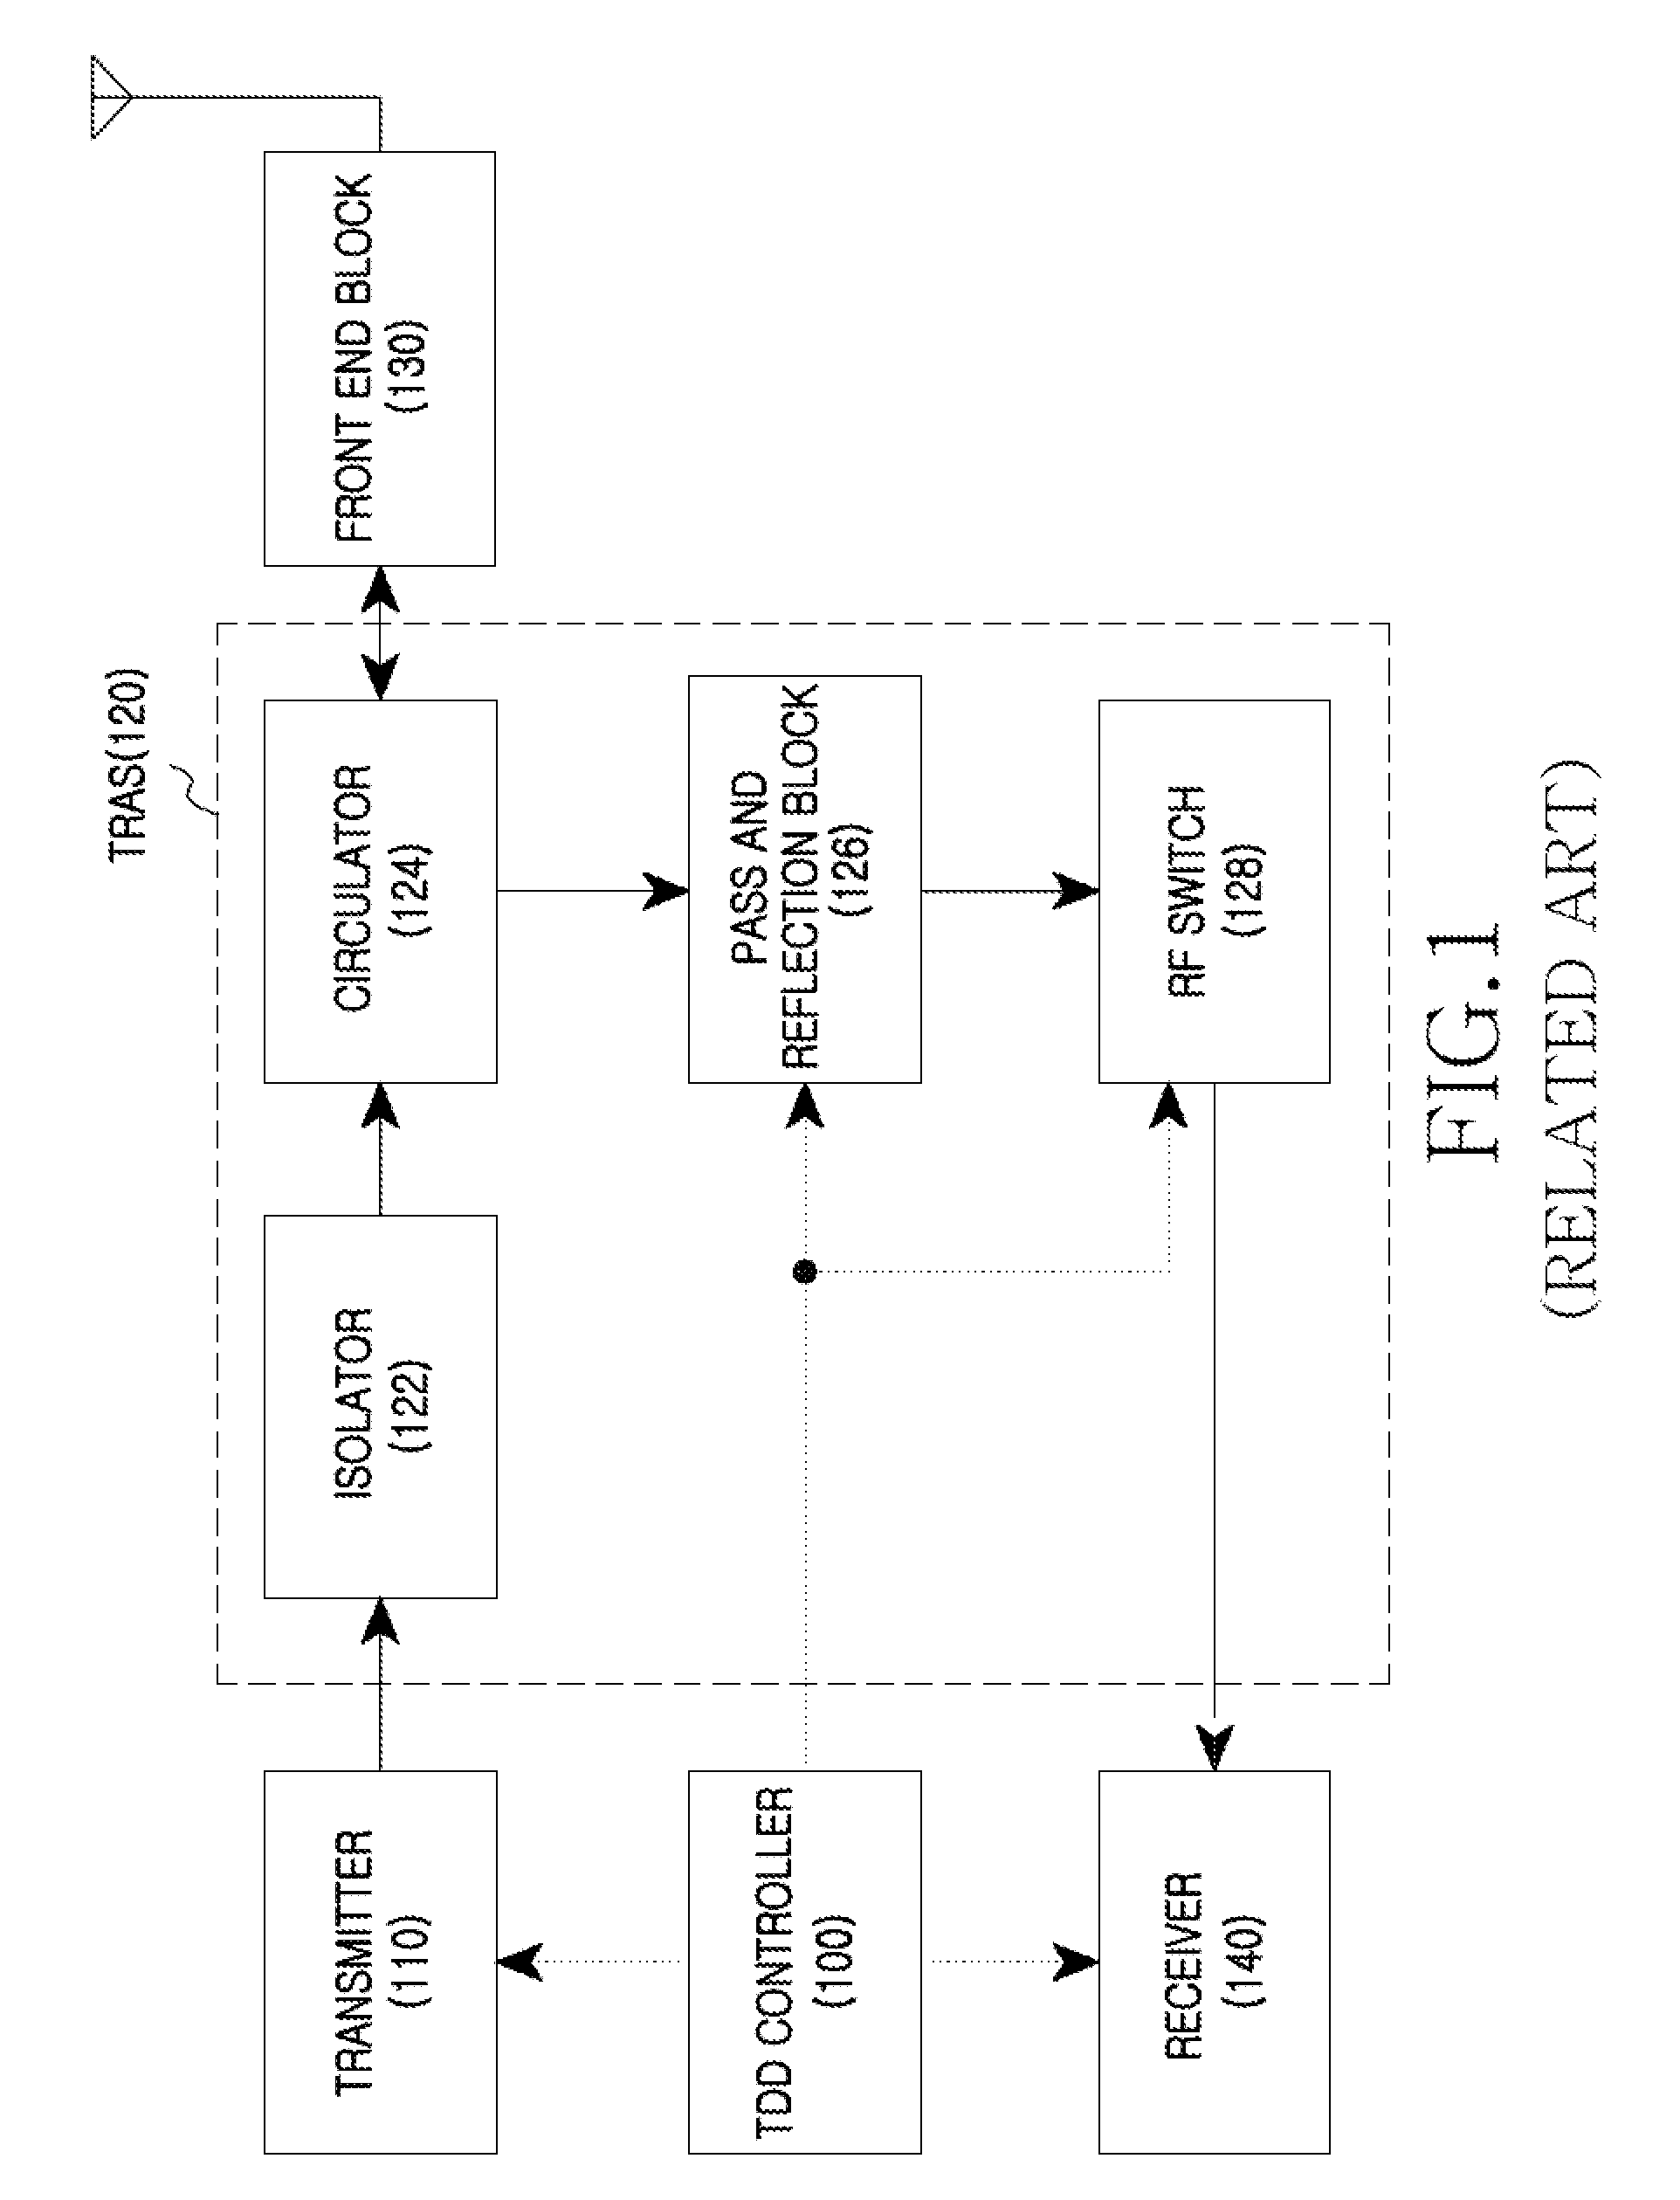 Apparatus and method for protecting receive circuits in TDD wireless communication system